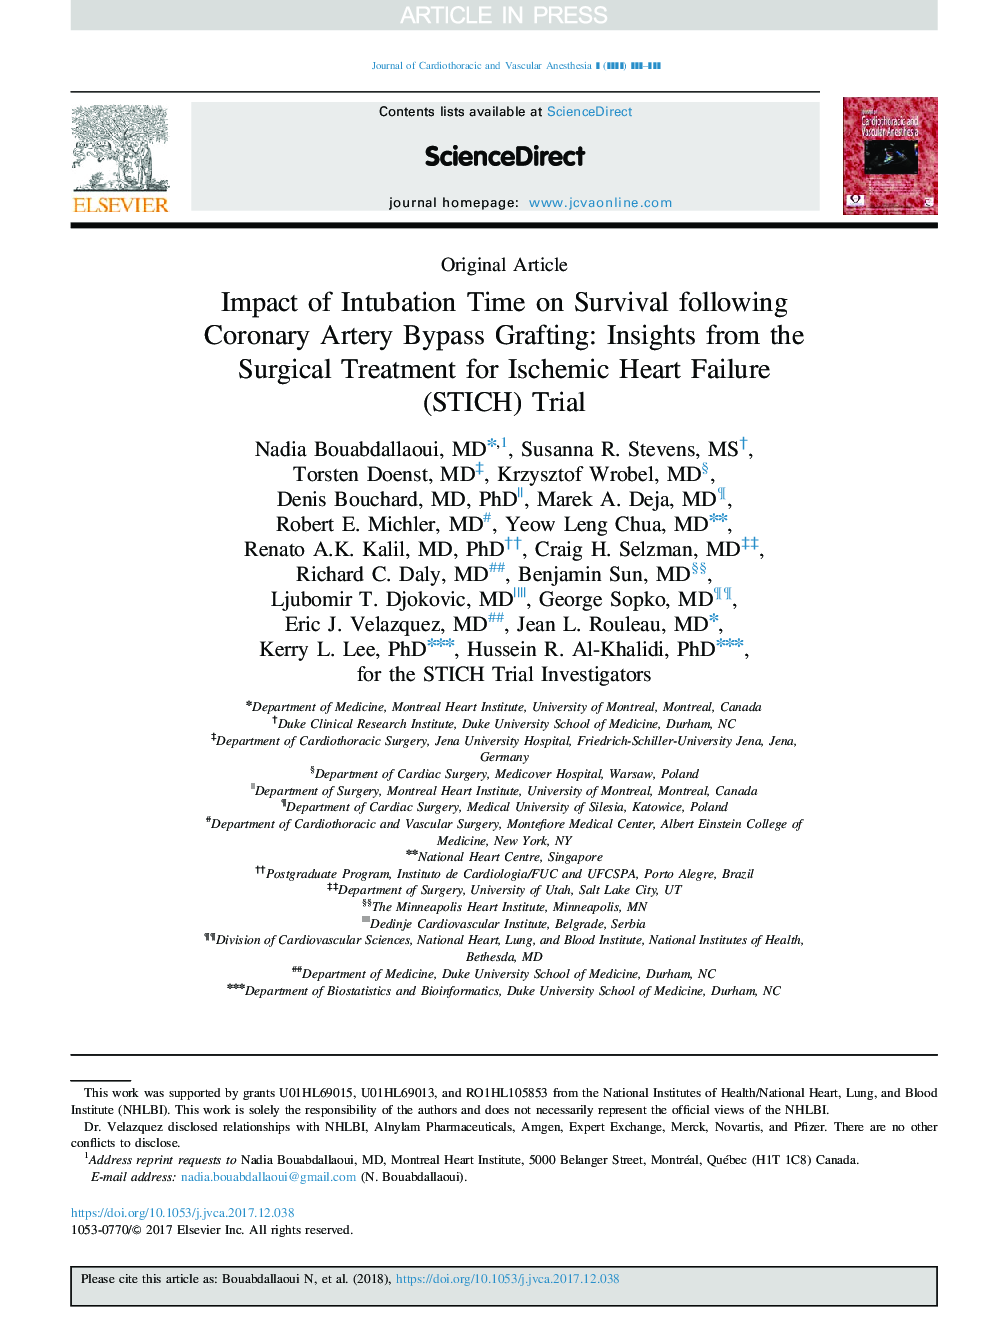 Impact of Intubation Time on Survival following Coronary Artery Bypass Grafting: Insights from the Surgical Treatment for Ischemic Heart Failure (STICH) Trial